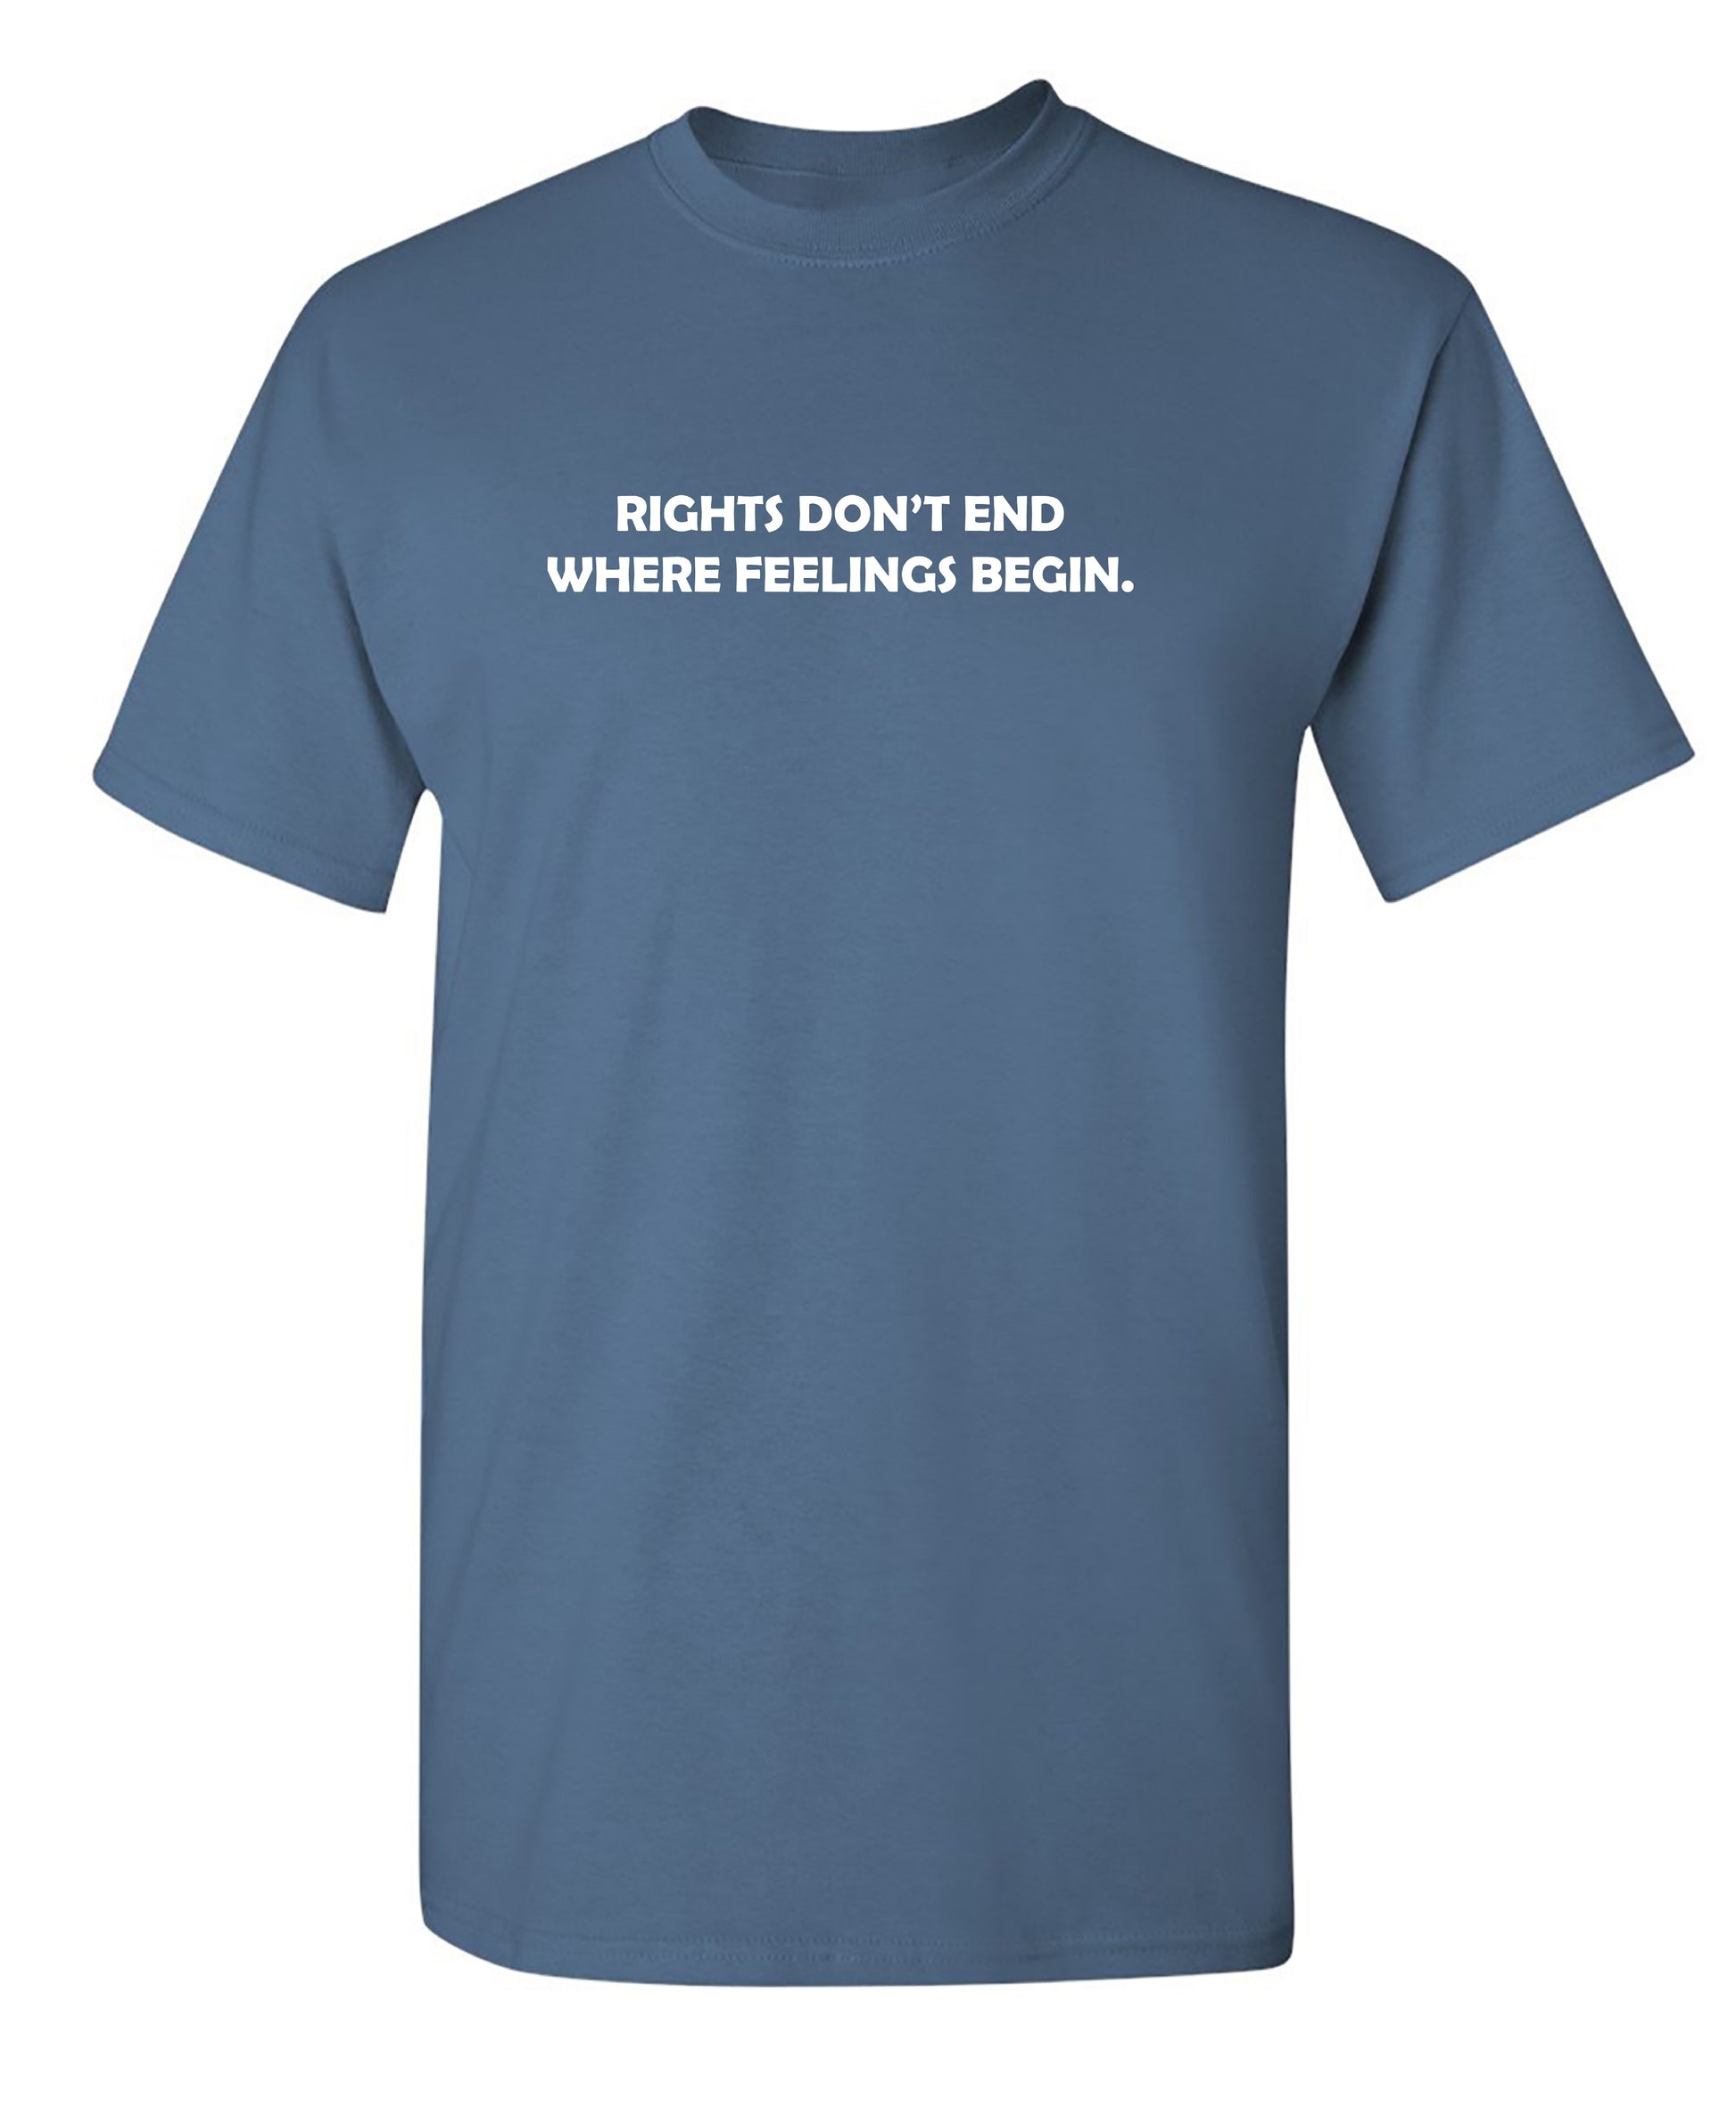 Rights Don't End Where Feelings Begin - Funny T Shirts & Graphic Tees